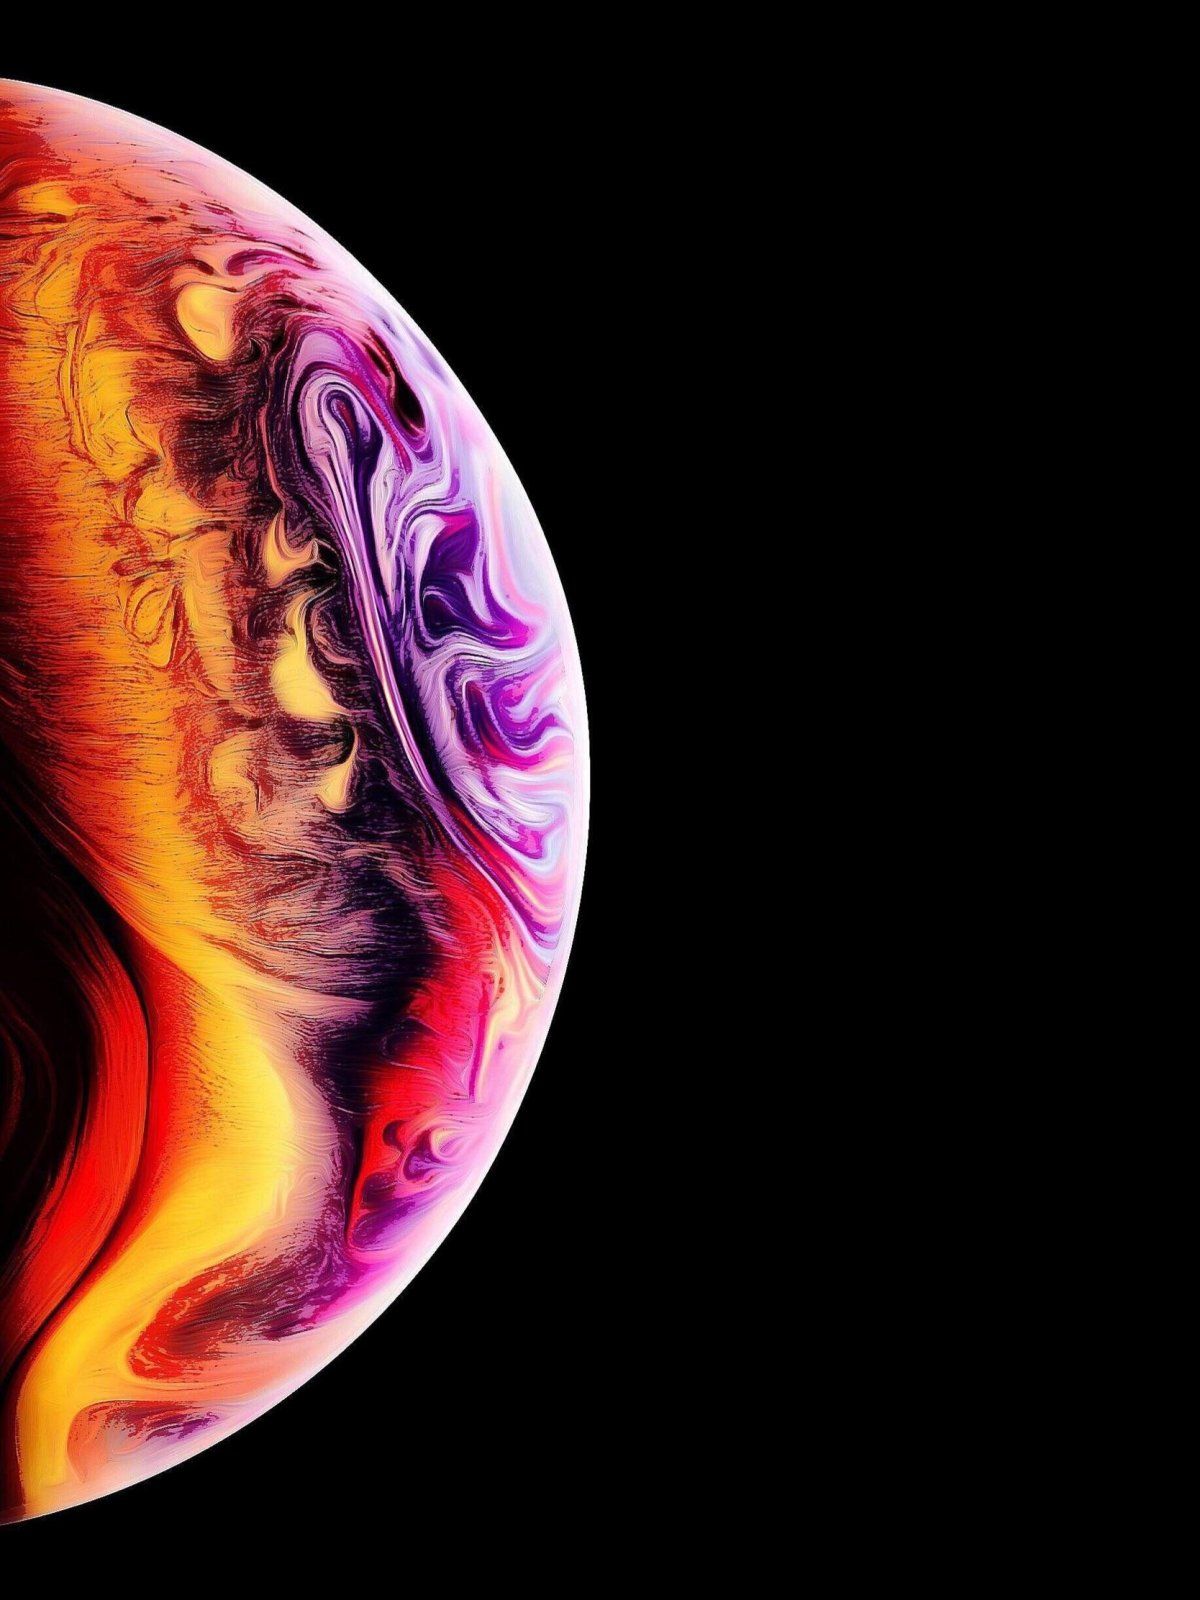 Leaked iPhone Xs Wallpaper For iPad Pro 10.5 • iPhone Paradise